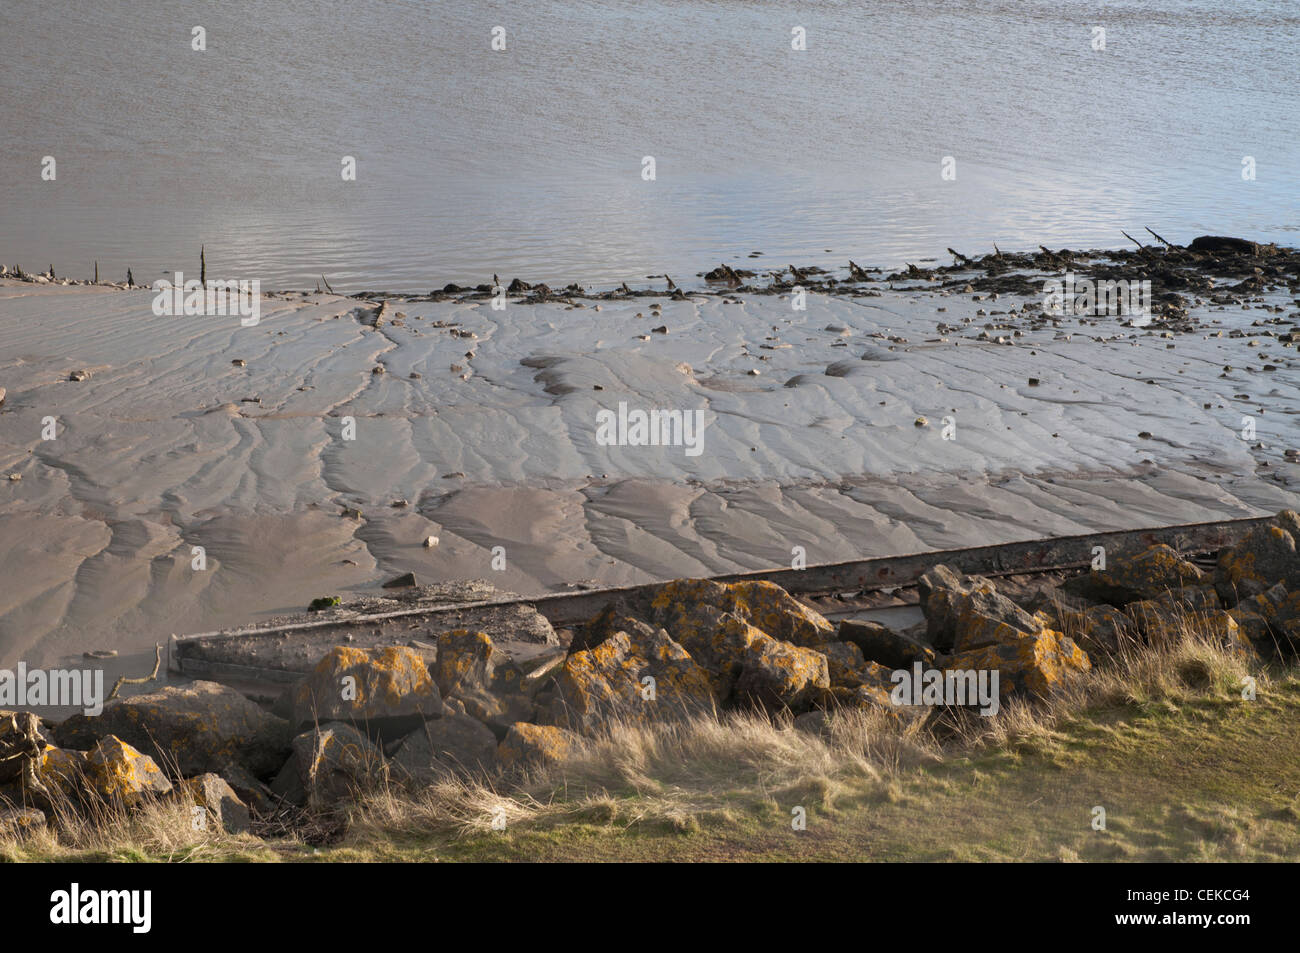 sand and mud banks with rocks at low tide Stock Photo